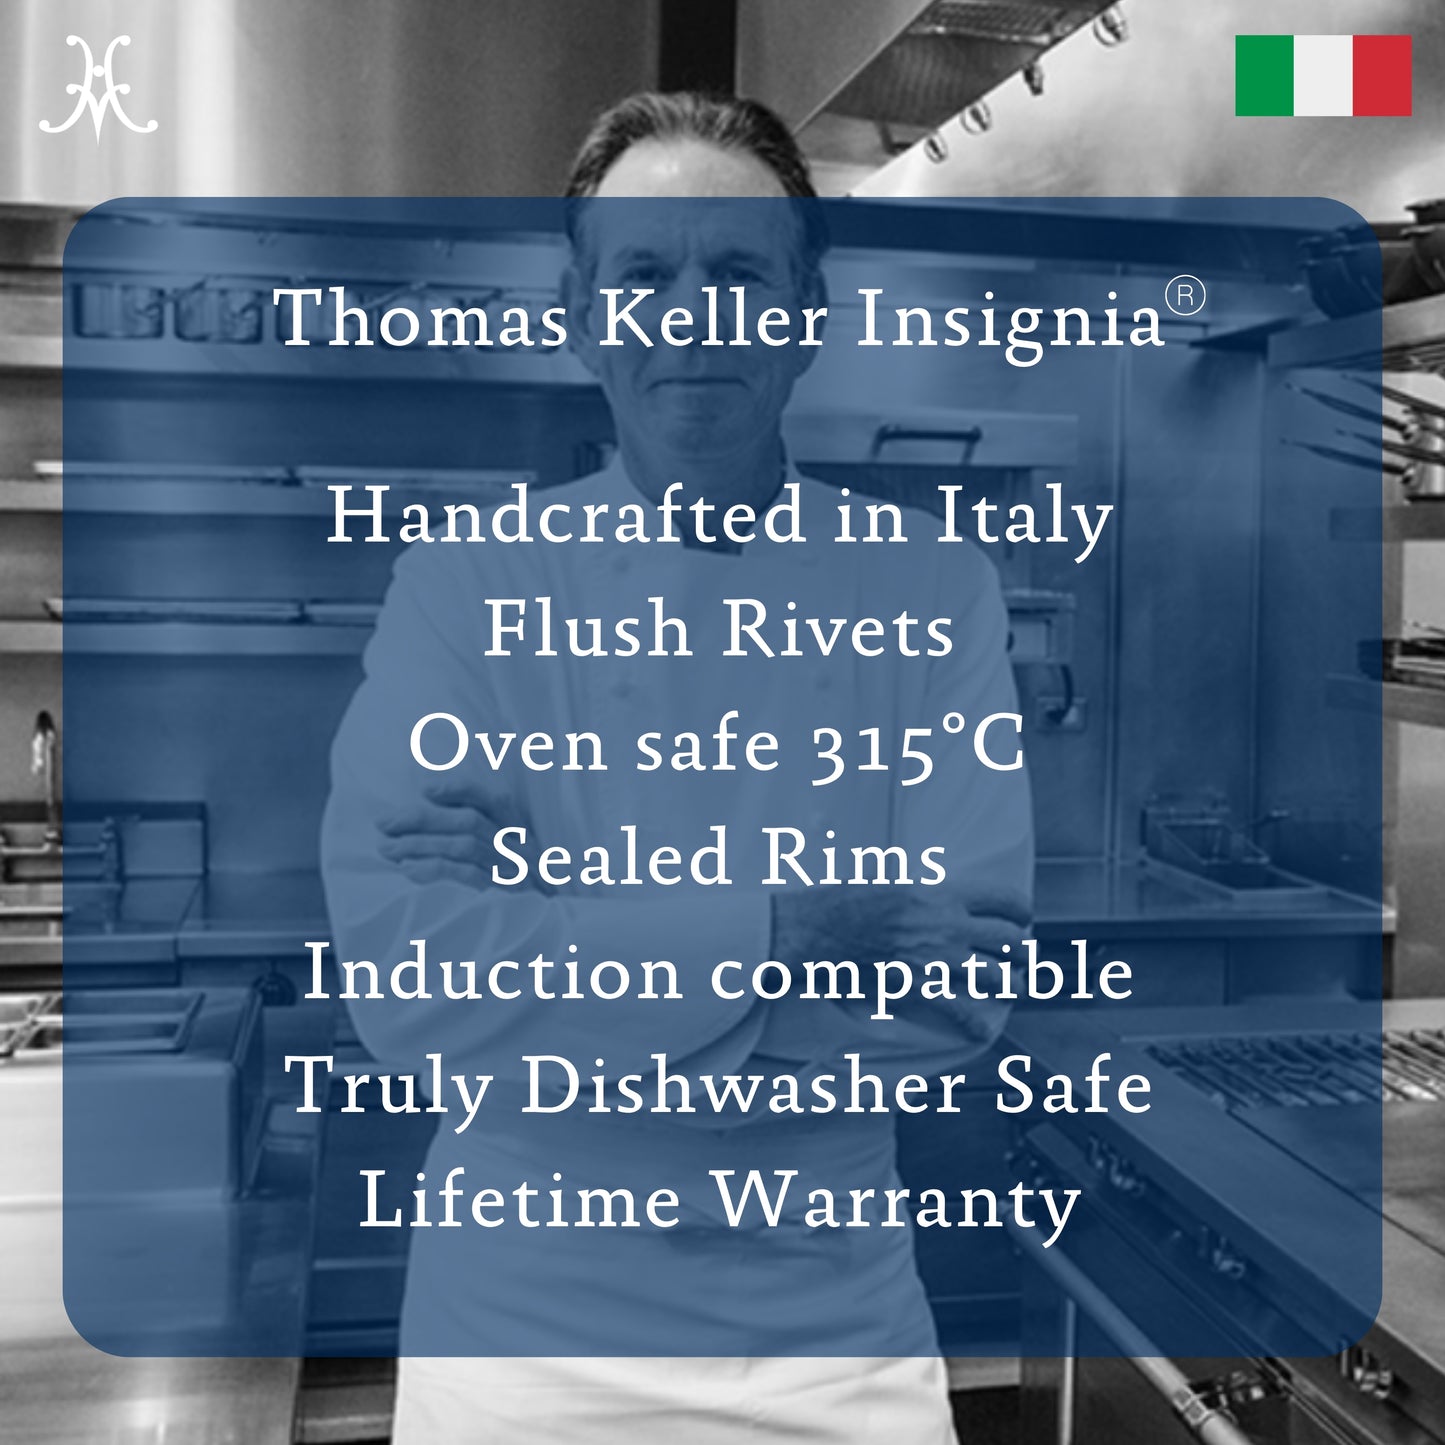 Hestan Thomas Keller Insignia Commercial Clad Stainless Steel Sauteuse 30cm/5.7L